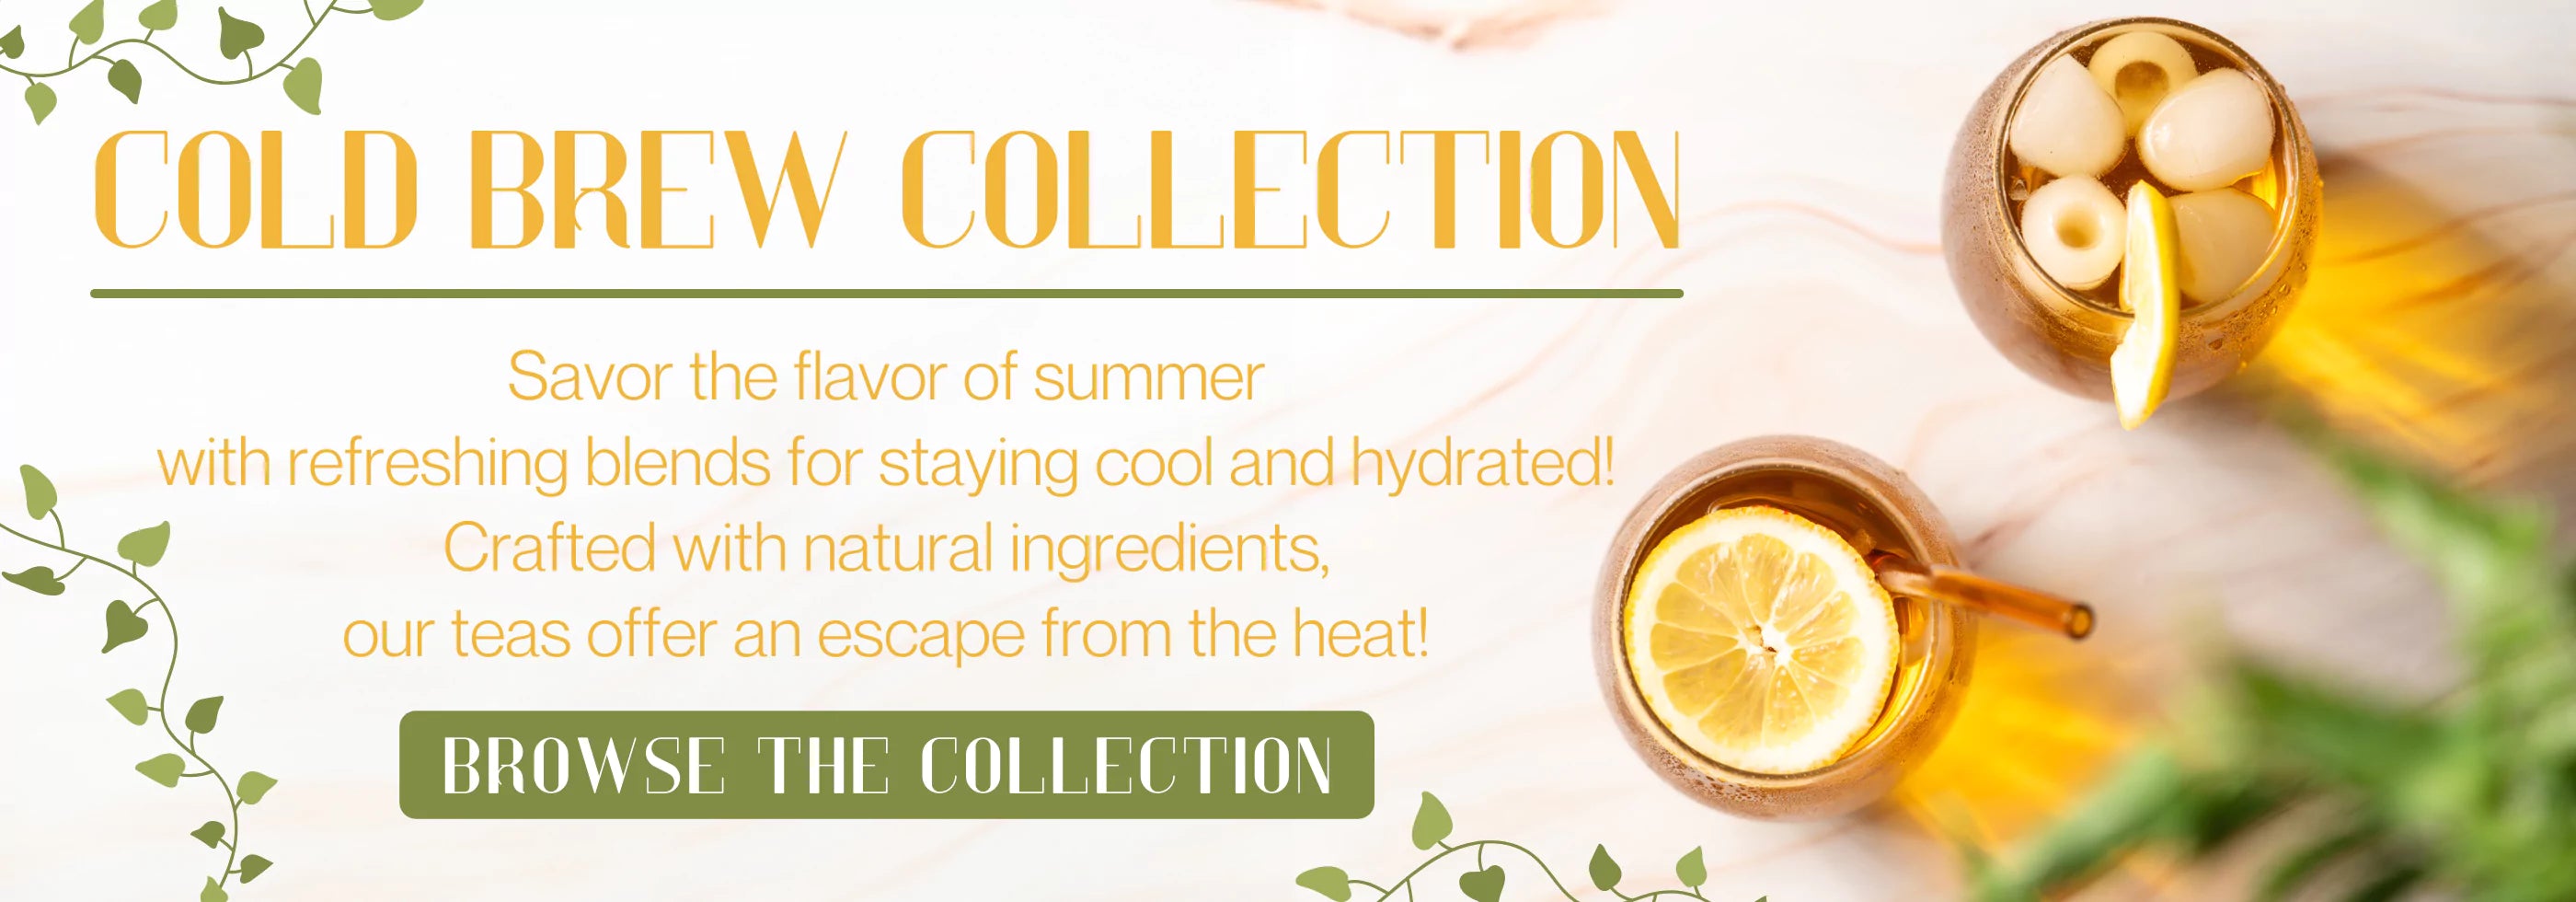 Cold Brew Collection banner with summer refreshing tea blends.